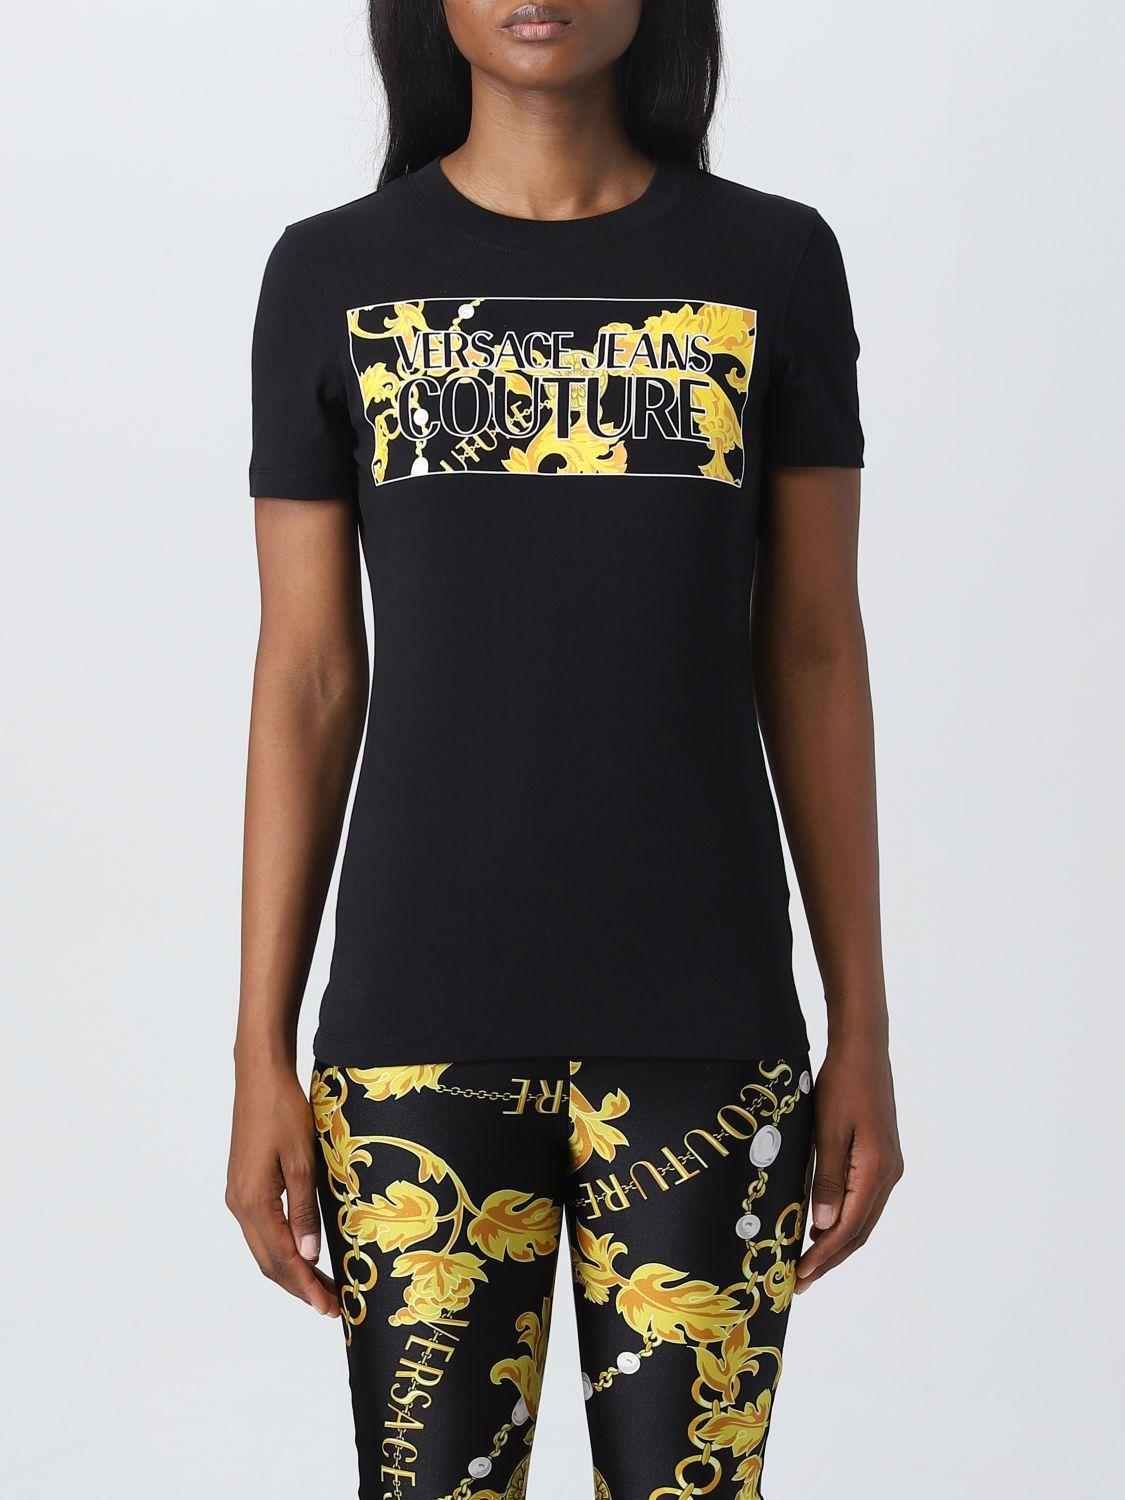 Versace Jeans Couture Cotton T-shirt in Black | Lyst